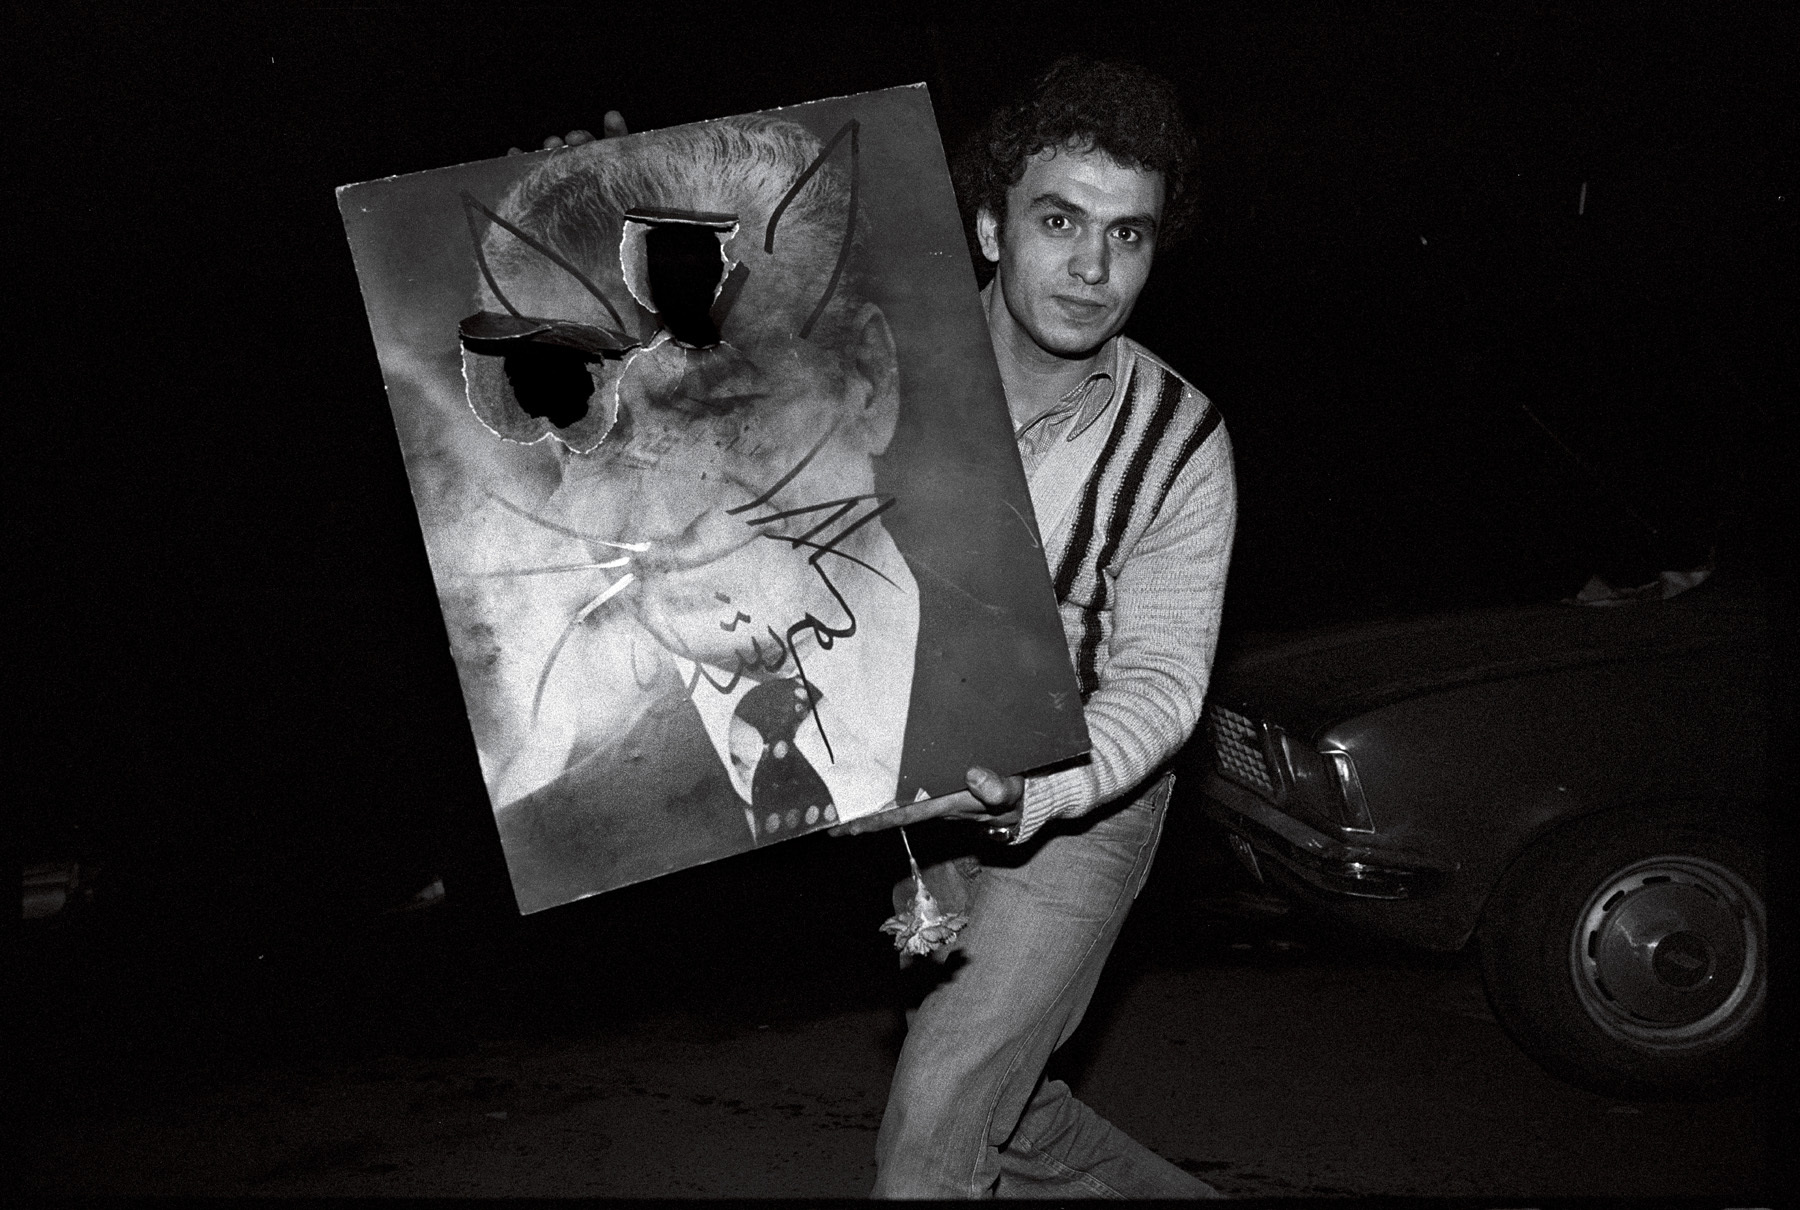 A young man displays a defaced portrait of the Shah. : 44 Days: the Iranian Revolution : David Burnett | Photographer